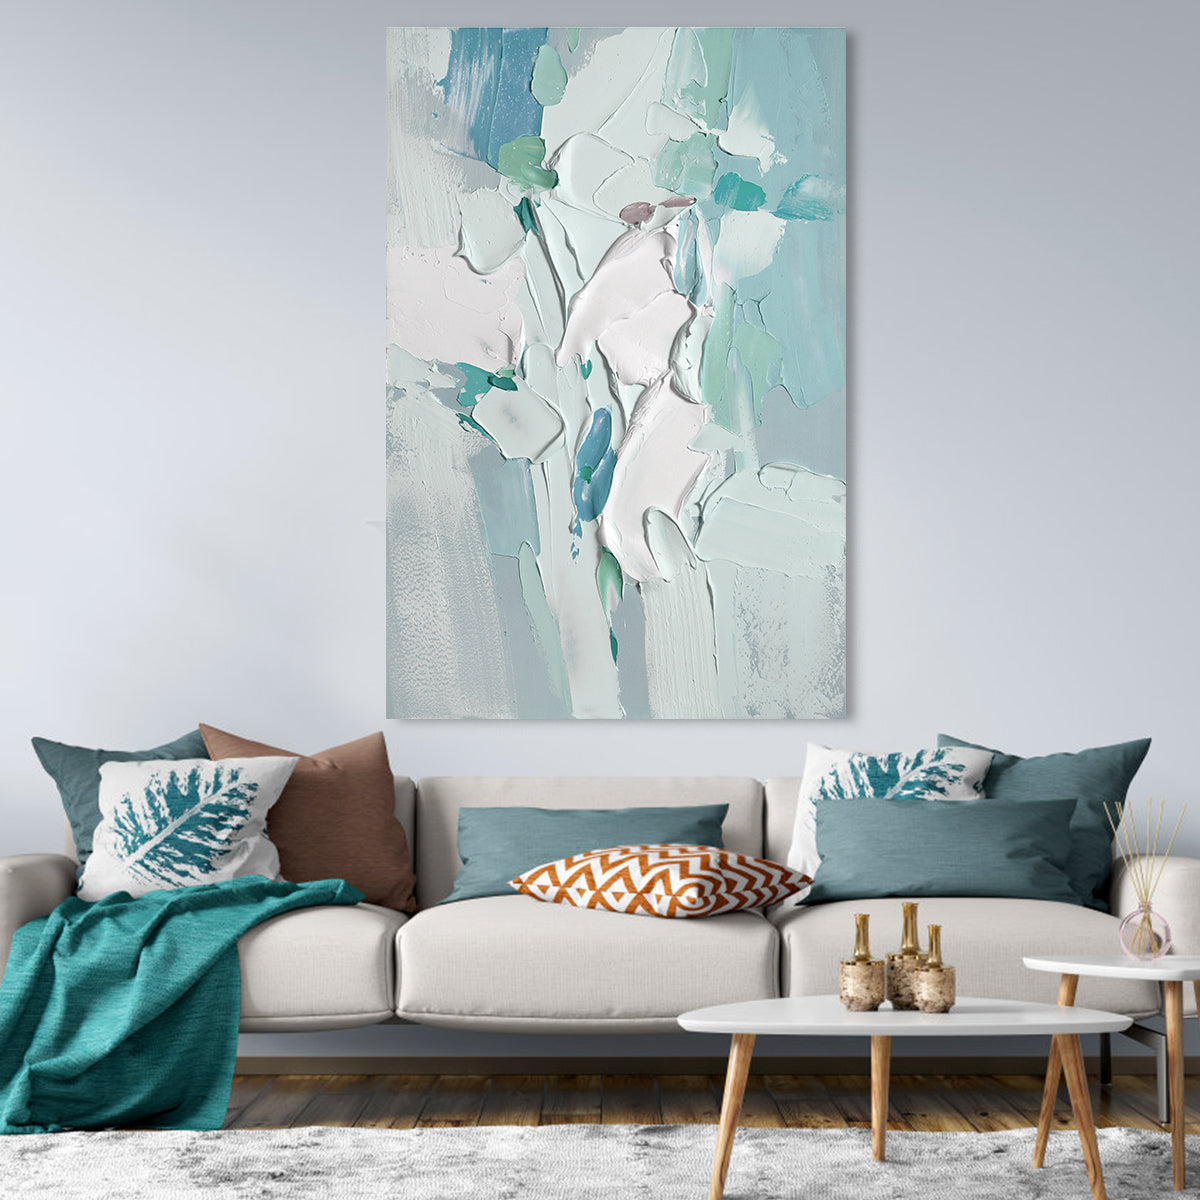 Icy Serenity Abstract Painting